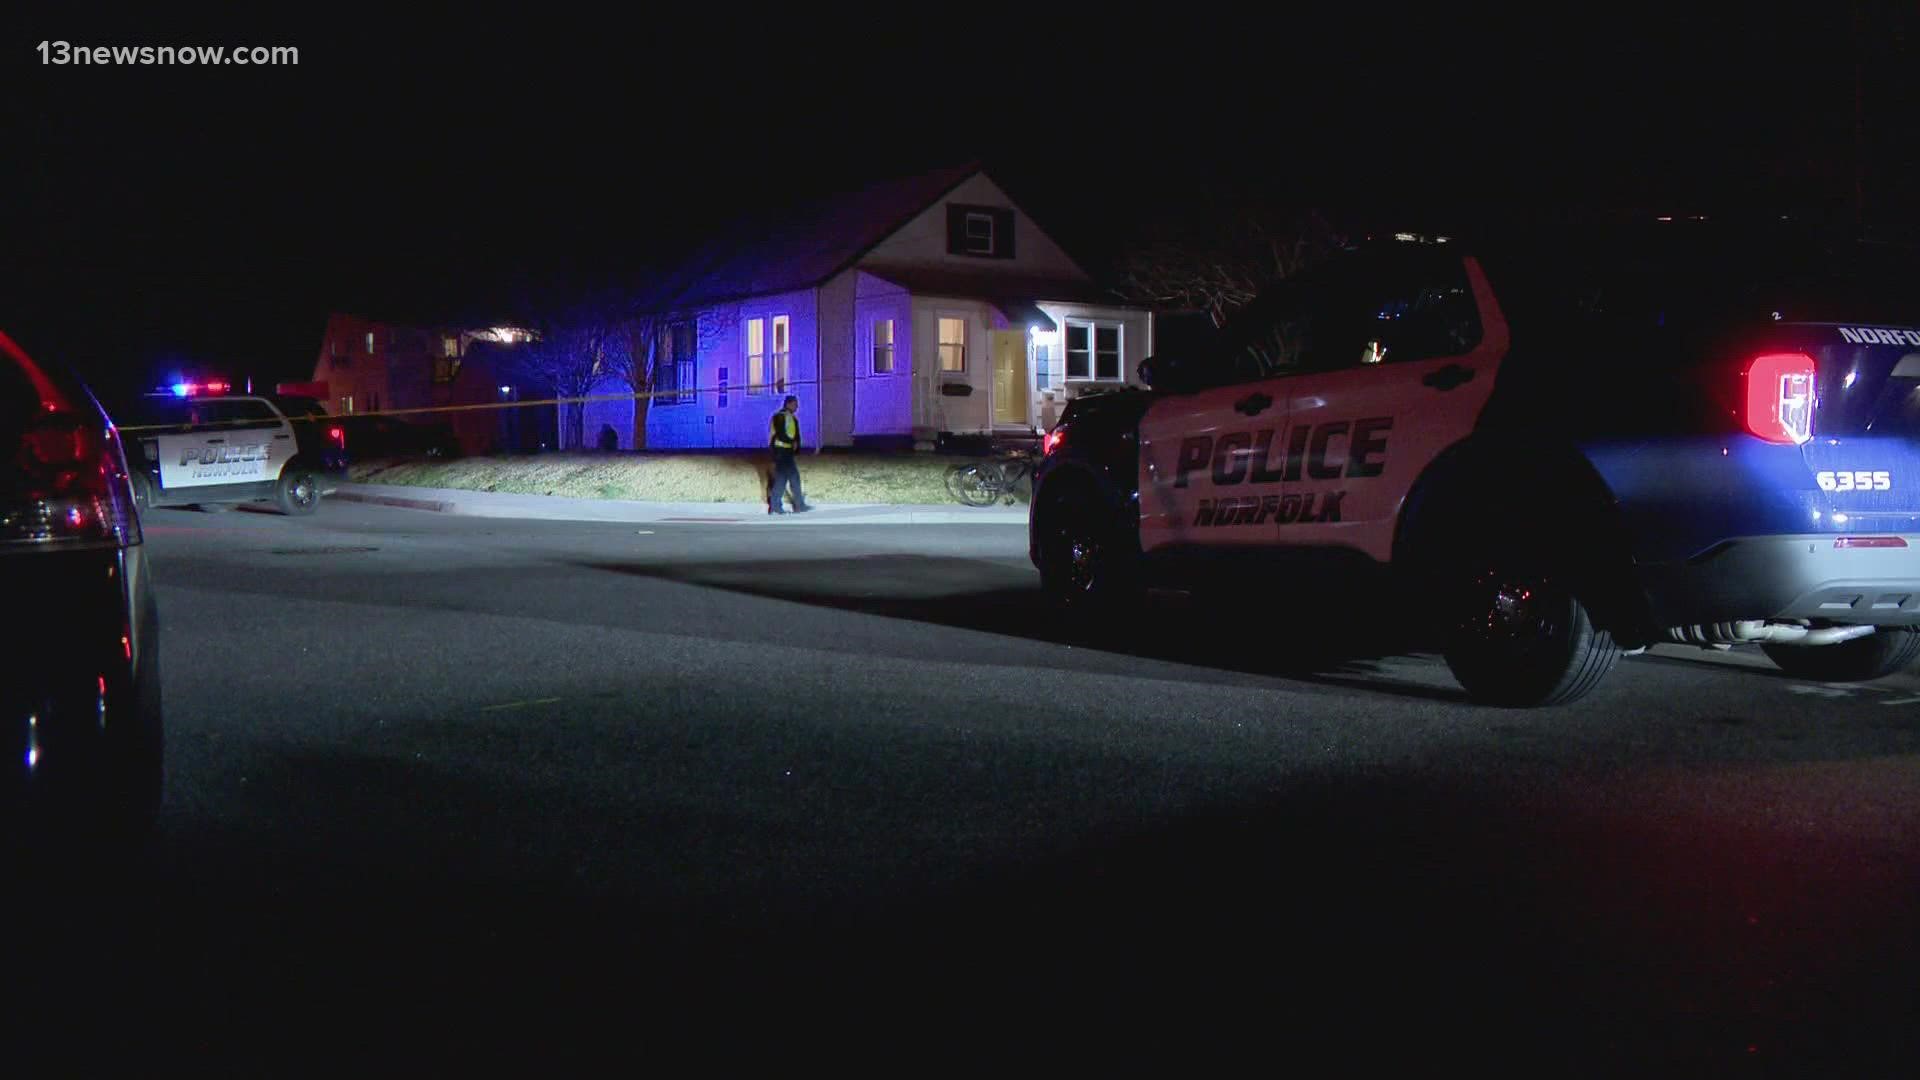 The Norfolk Police Department said a man was killed and a woman was seriously injured in a shooting inside a home in the West Ocean View area.